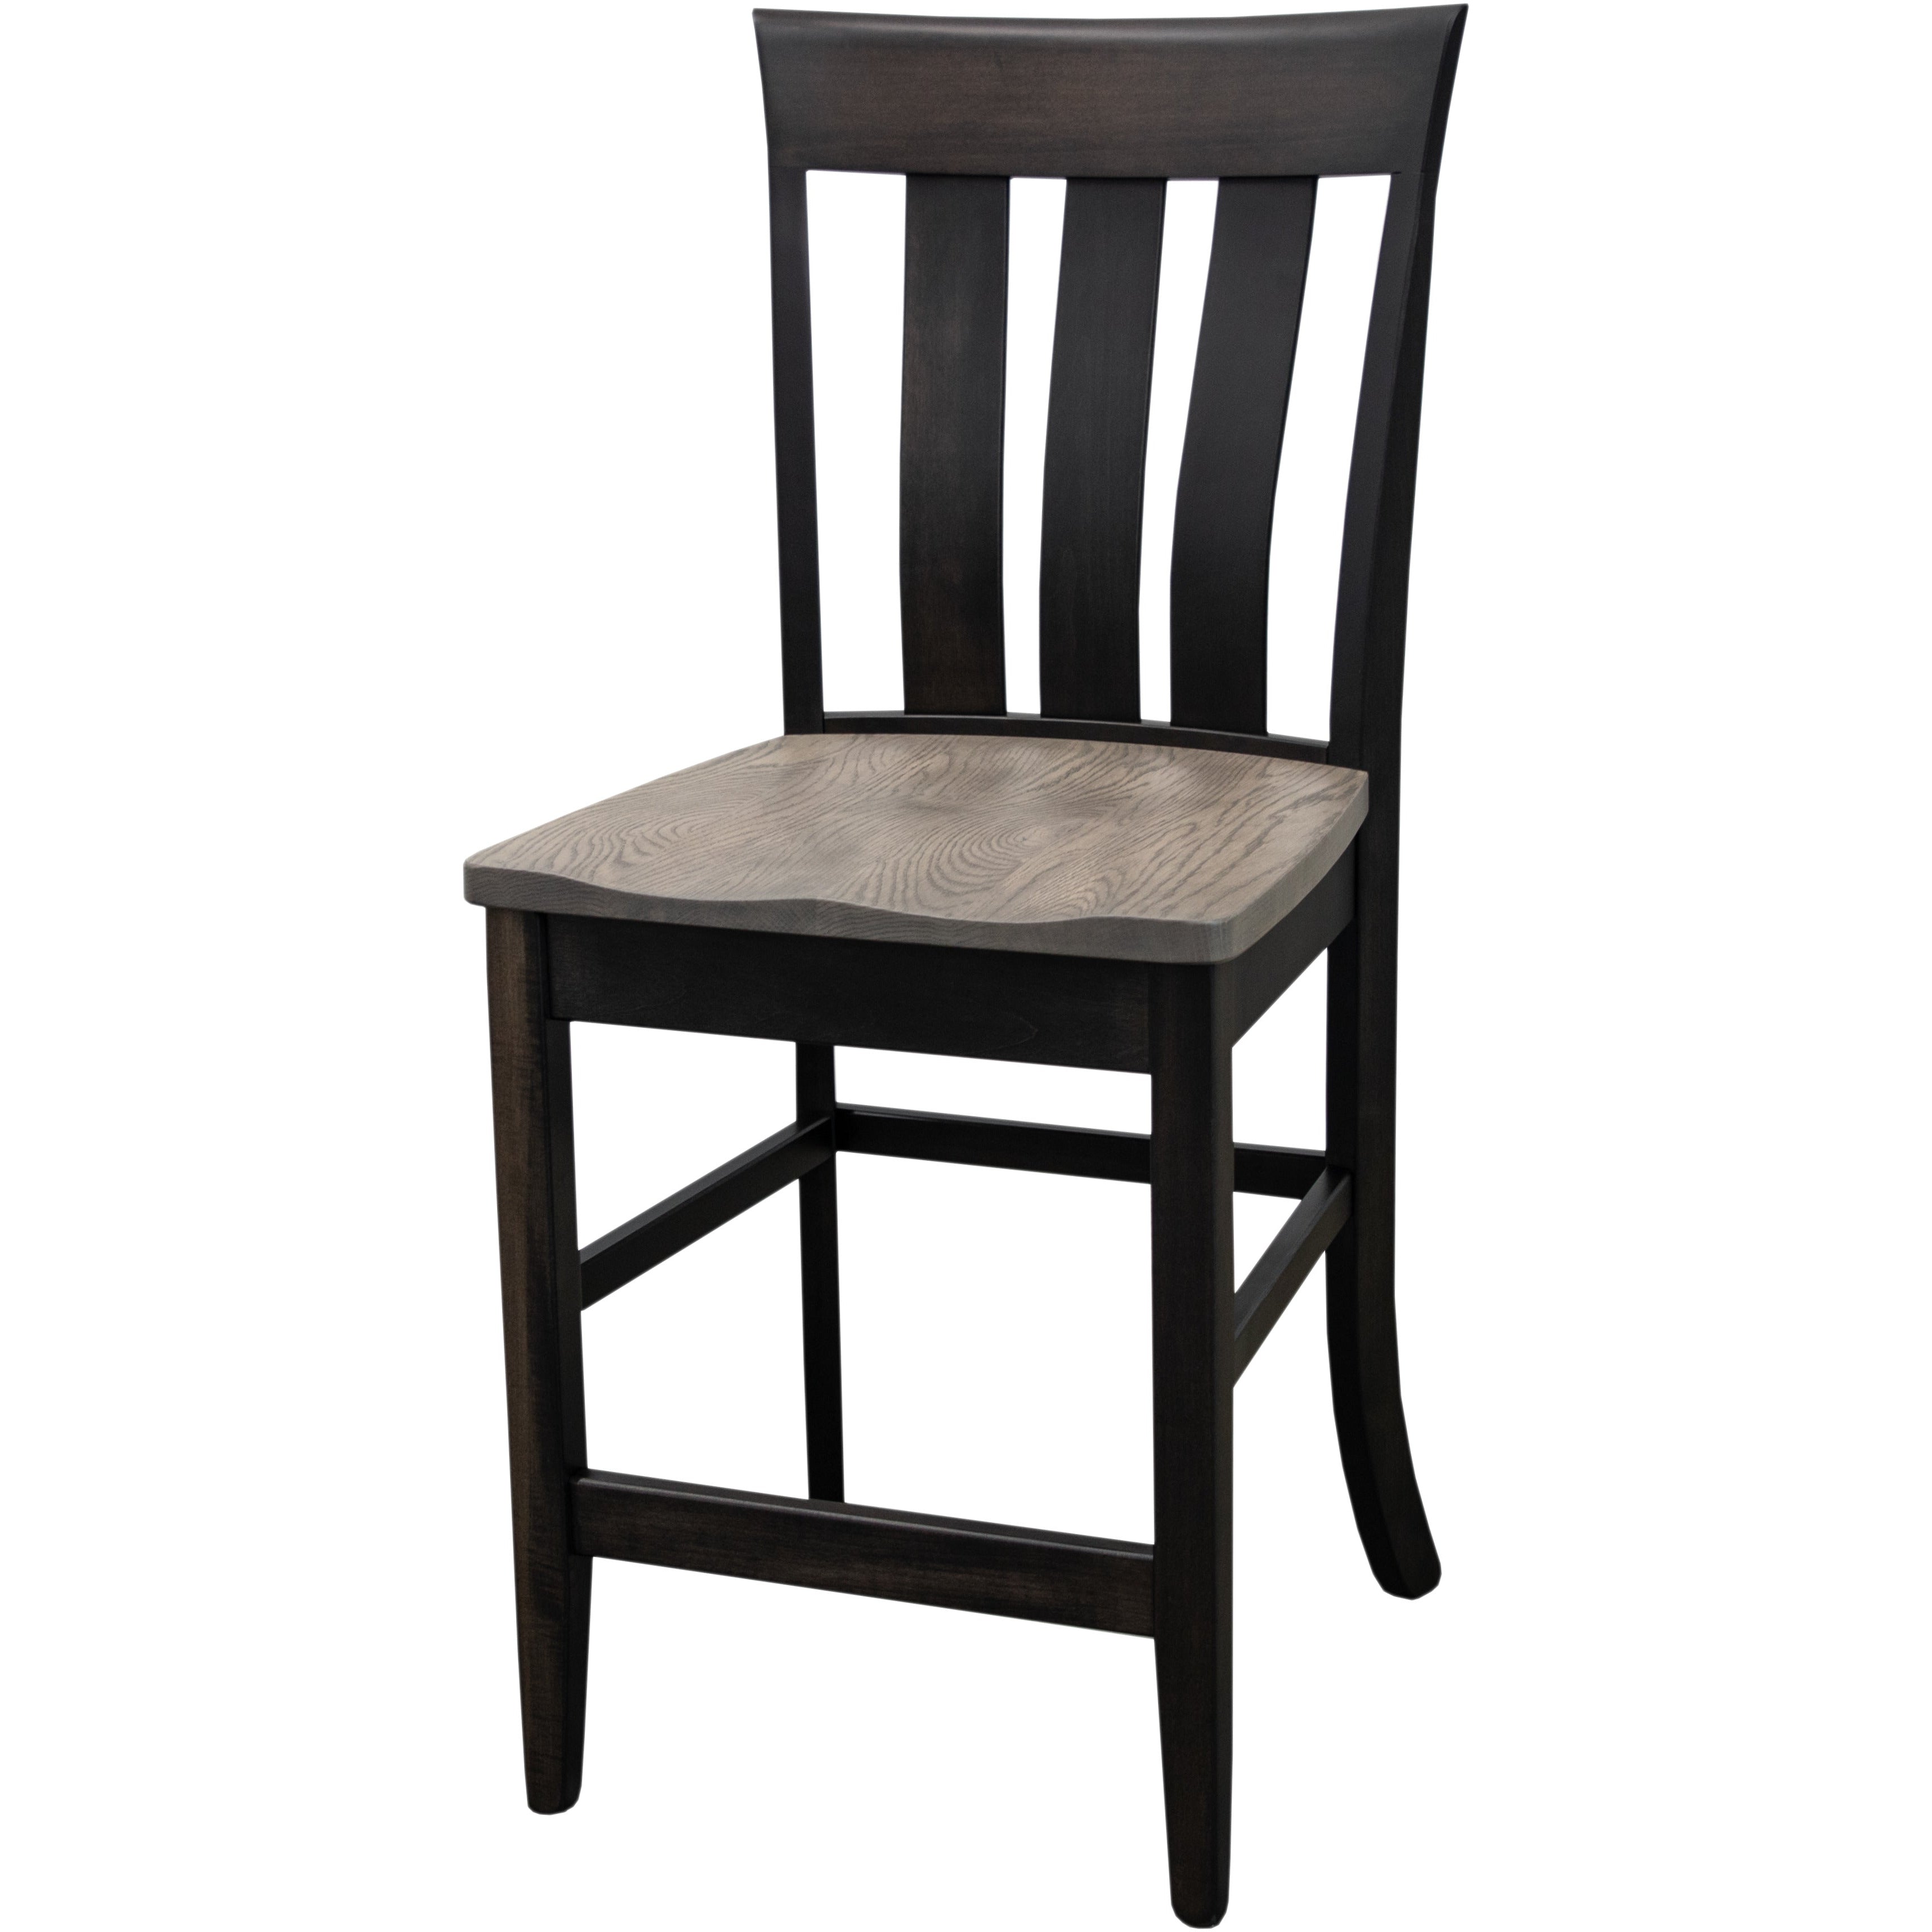 Curlew 24" Stationary Bar Chair